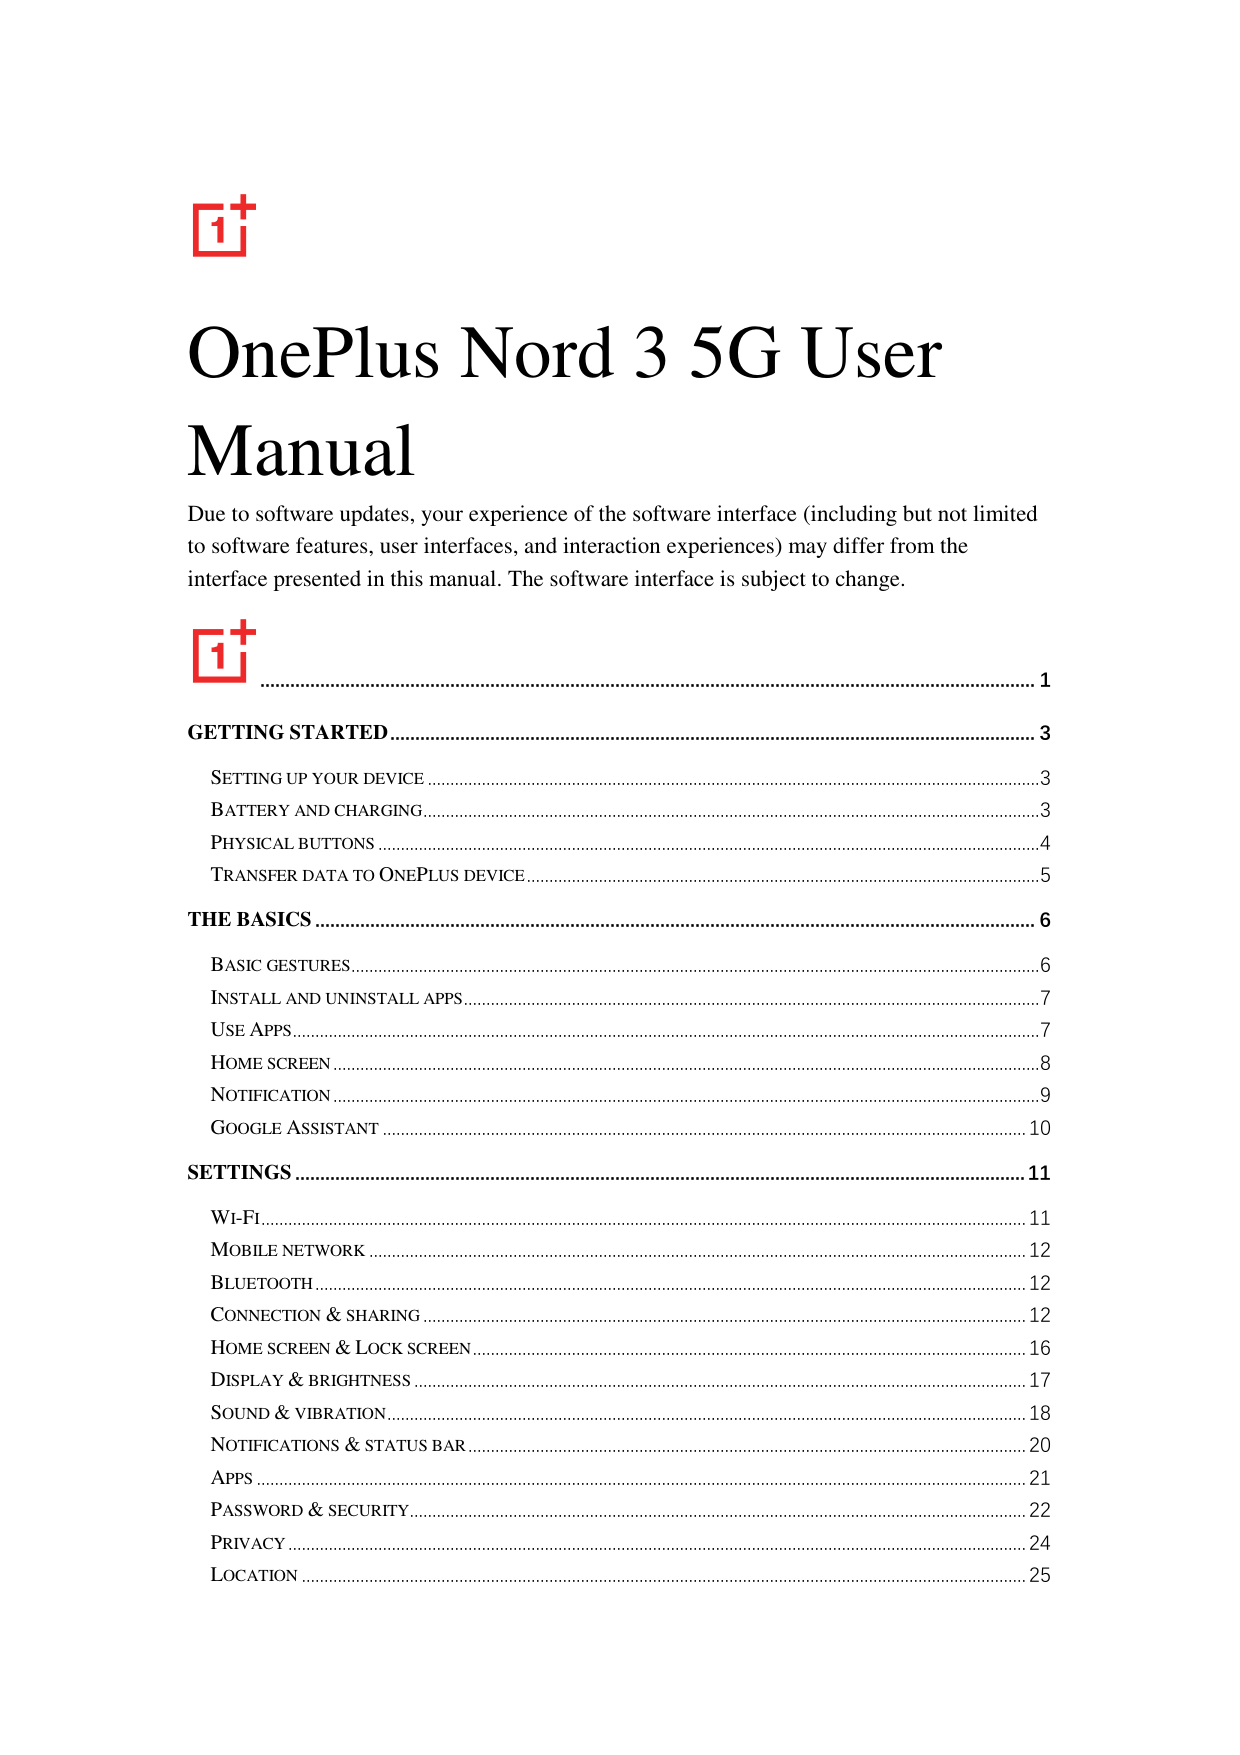 OnePlus Nord 3 5G UserManualDue to software updates, your experience of the software interface (including but not limitedto soft